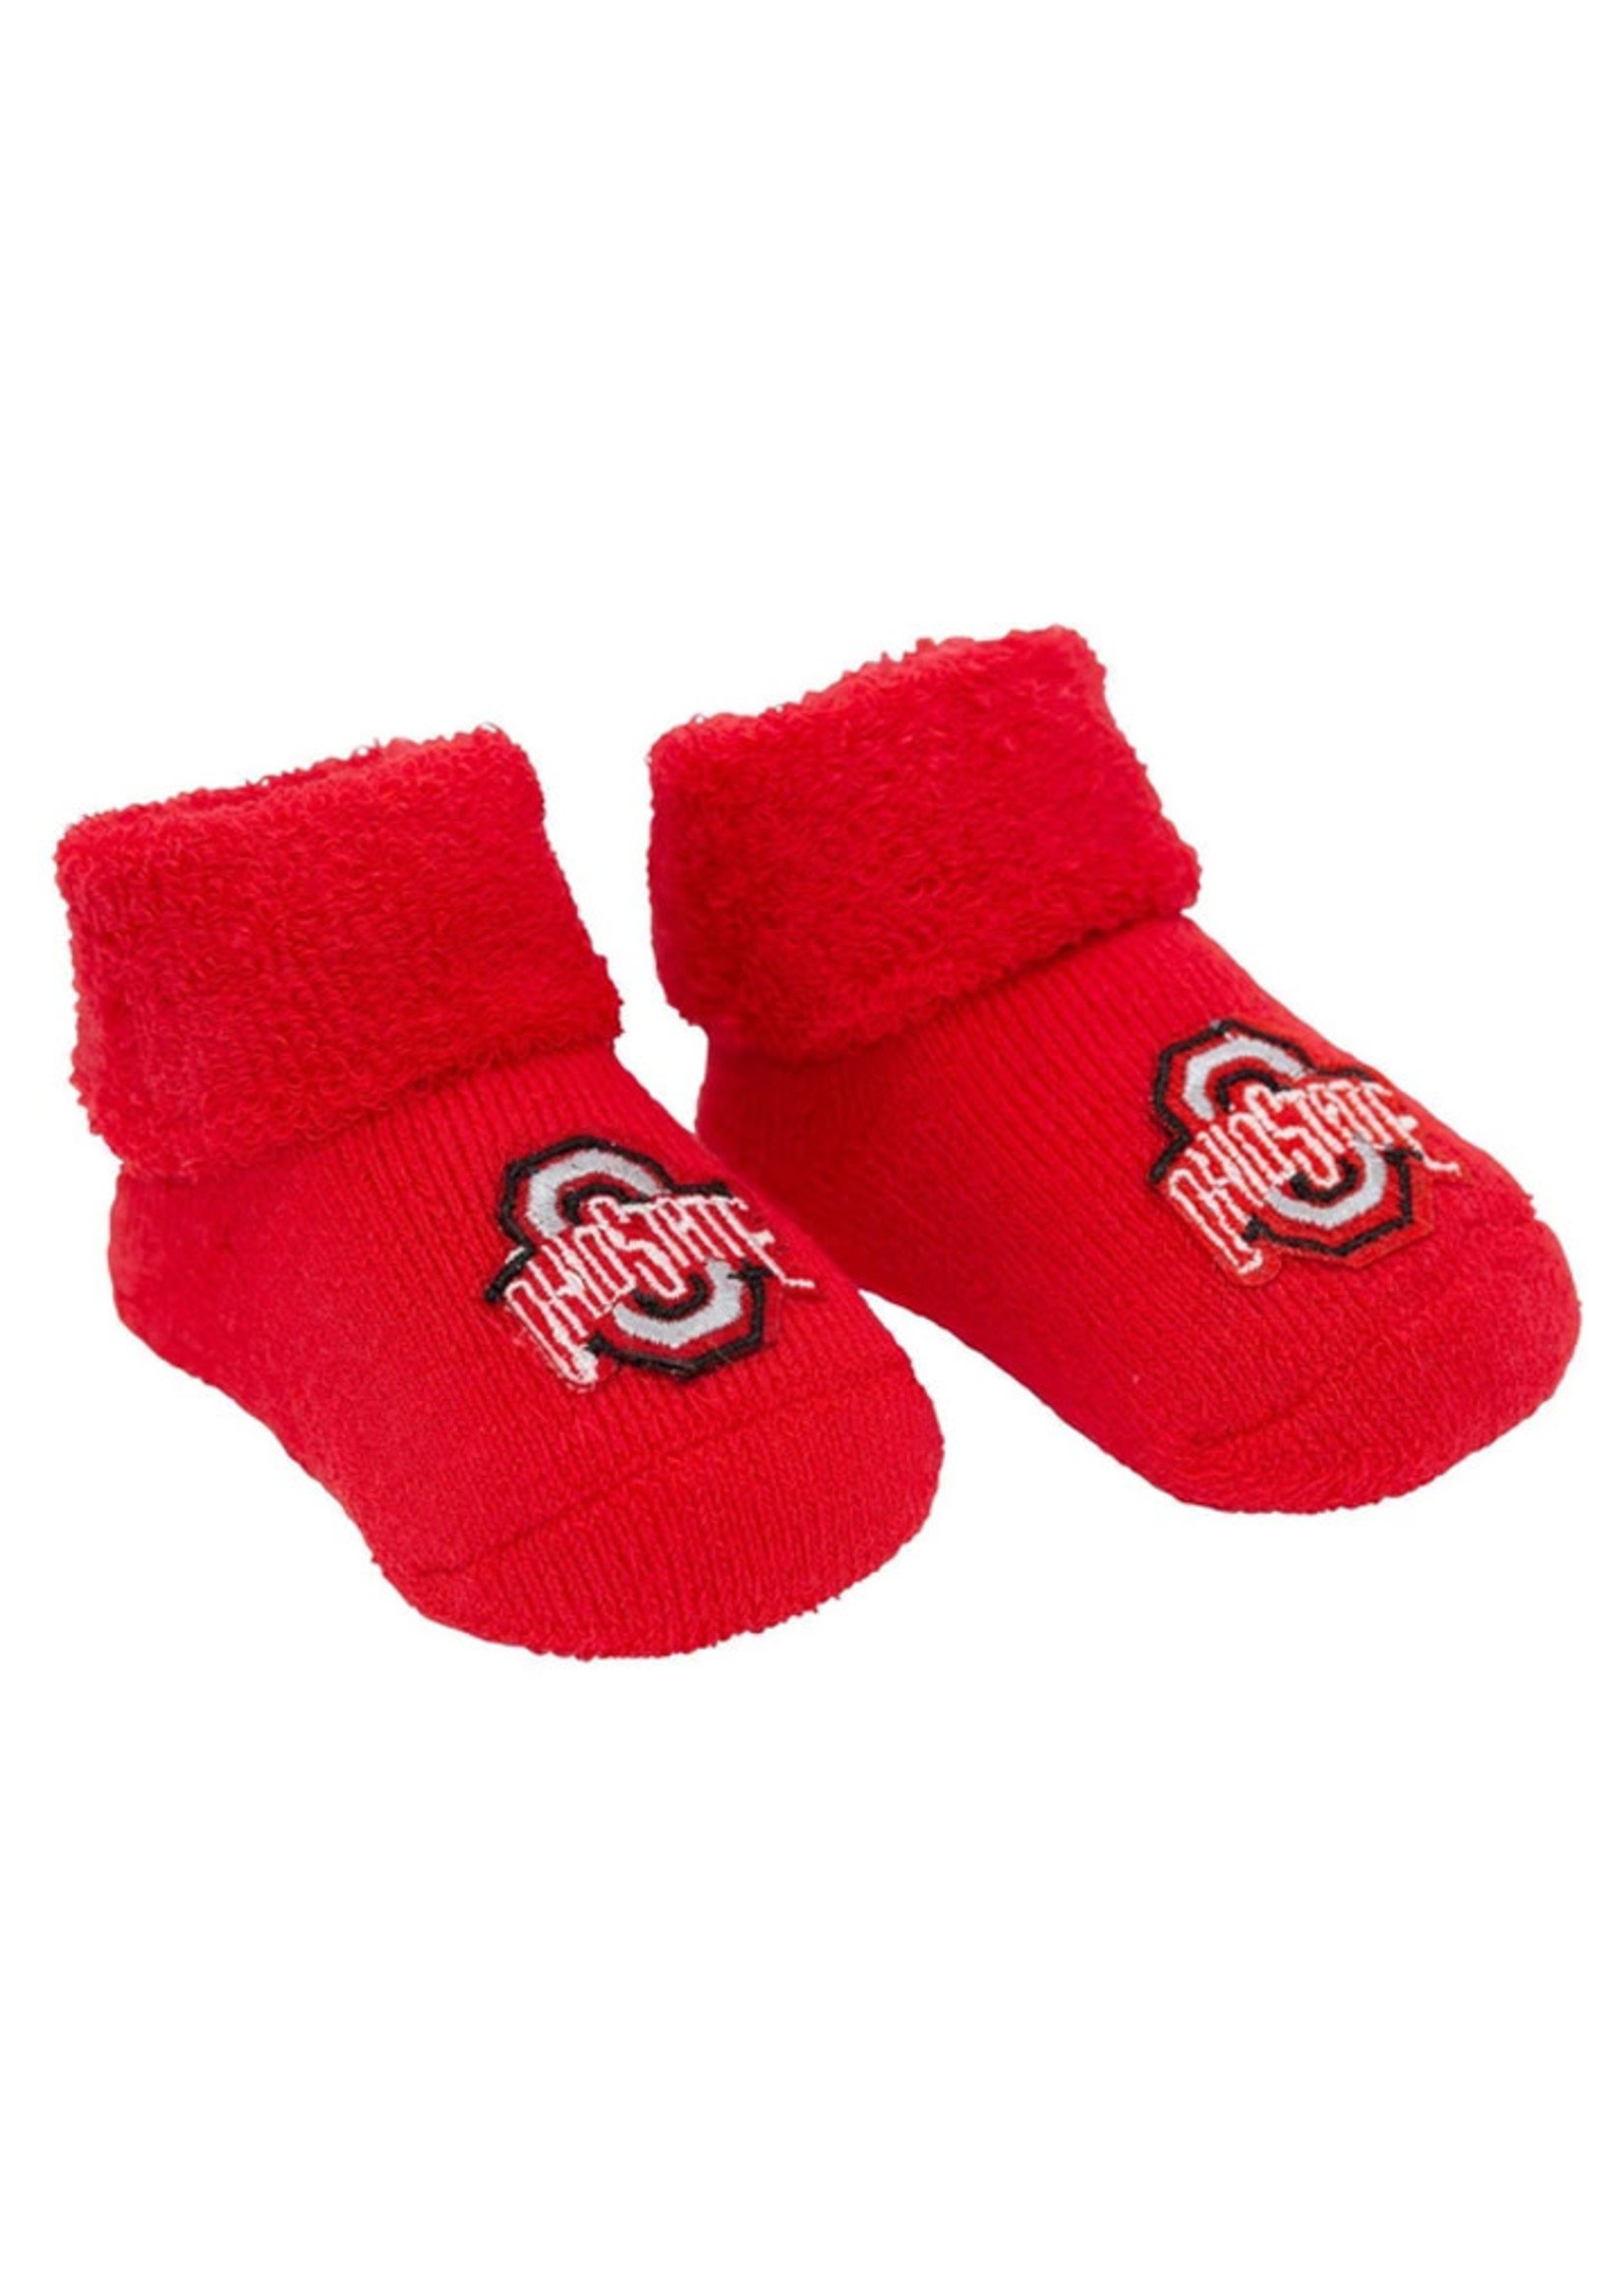 Ohio State Buckeyes Red Baby Booties